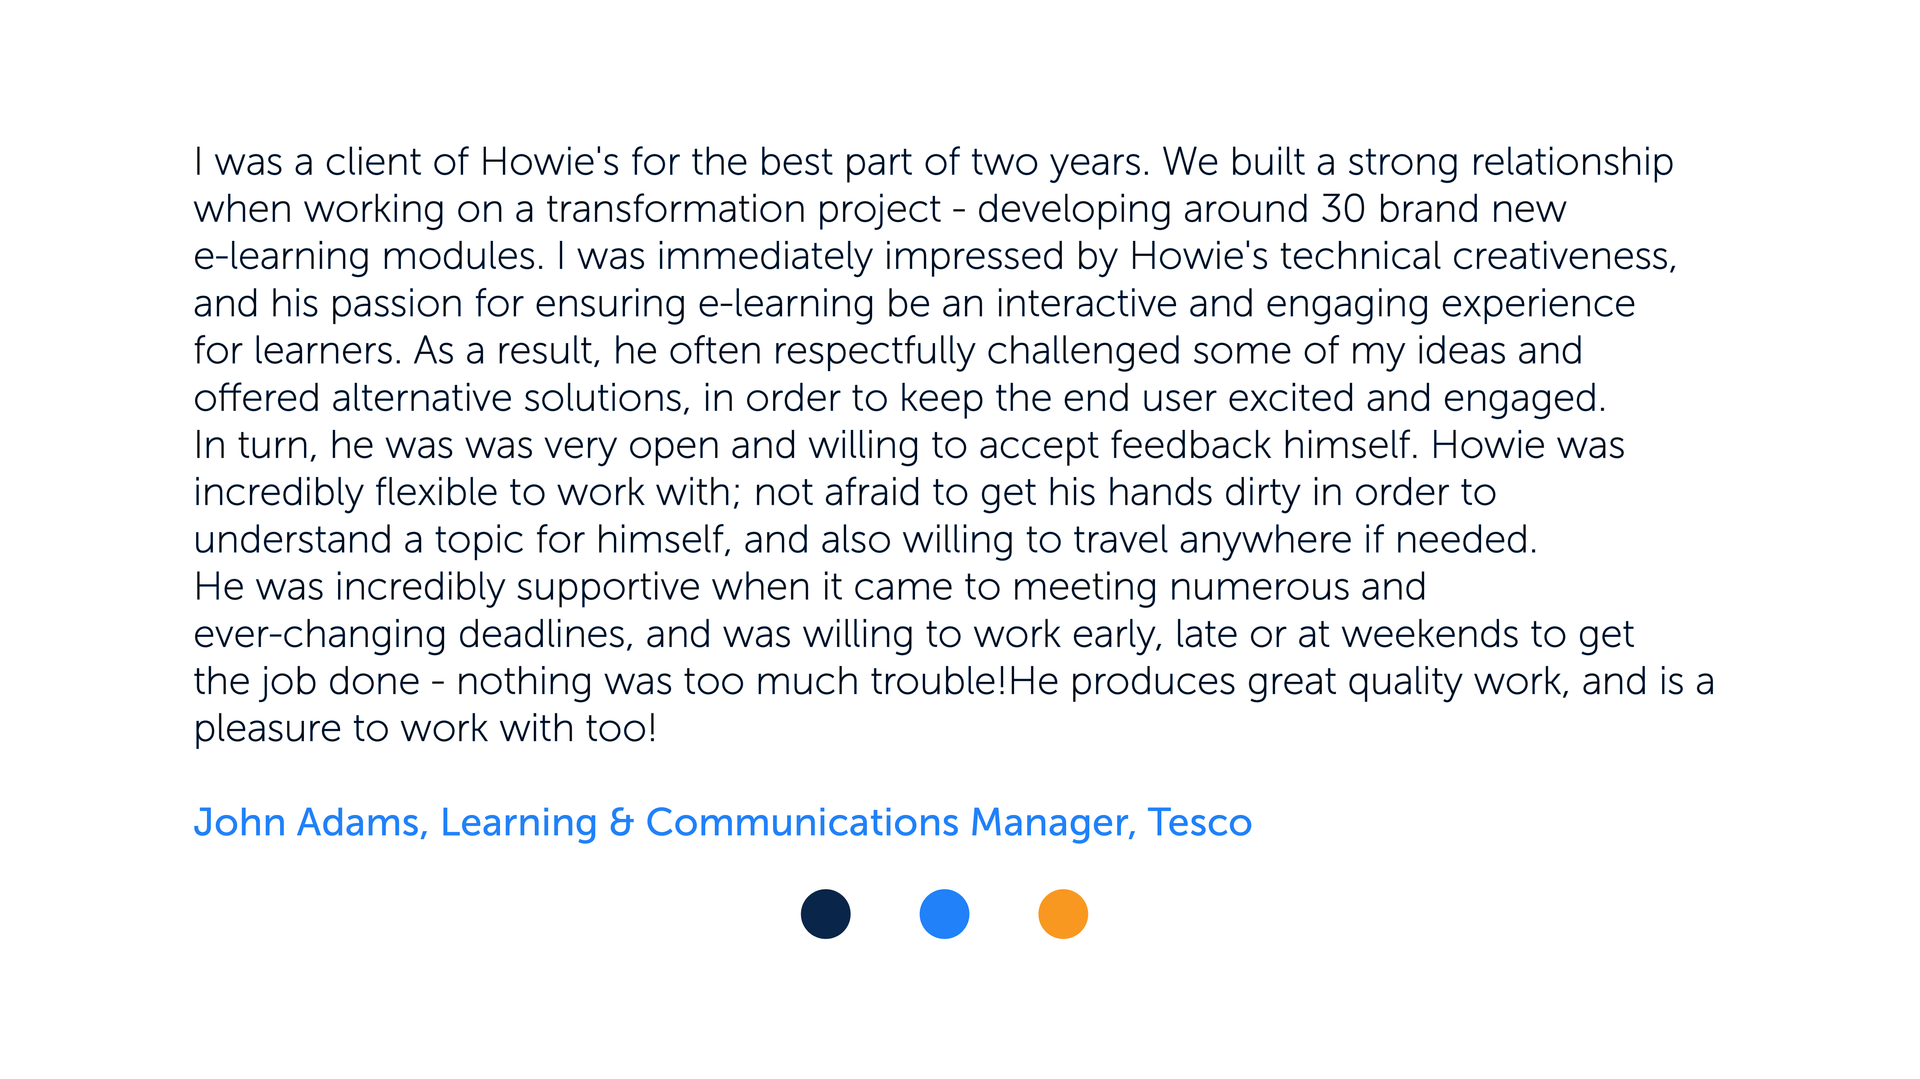 I was a client of Howie's for the best part of two years. We built a strong relationship when working on a transformation project - developing around 30 brand new e-learning modules. I was immediately impressed by Howie's technical creativeness, and his passion for ensuring e-learning be an interactive and engaging experience for learners. As a result, he often respectfully challenged some of my ideas and offered alternative solutions, in order to keep the end user excited and engaged. In turn, he was was very open and willing to accept feedback himself.
Howie was incredibly flexible to work with; not afraid to get his hands dirty in order to understand a topic for himself, and also willing to travel anywhere if needed. He was incredibly supportive when it came to meeting numerous and ever-changing deadlines, and was willing to work early, late or at weekends to get the job done - nothing was too much trouble!
He produces great quality work, and is a pleasure to work with too!